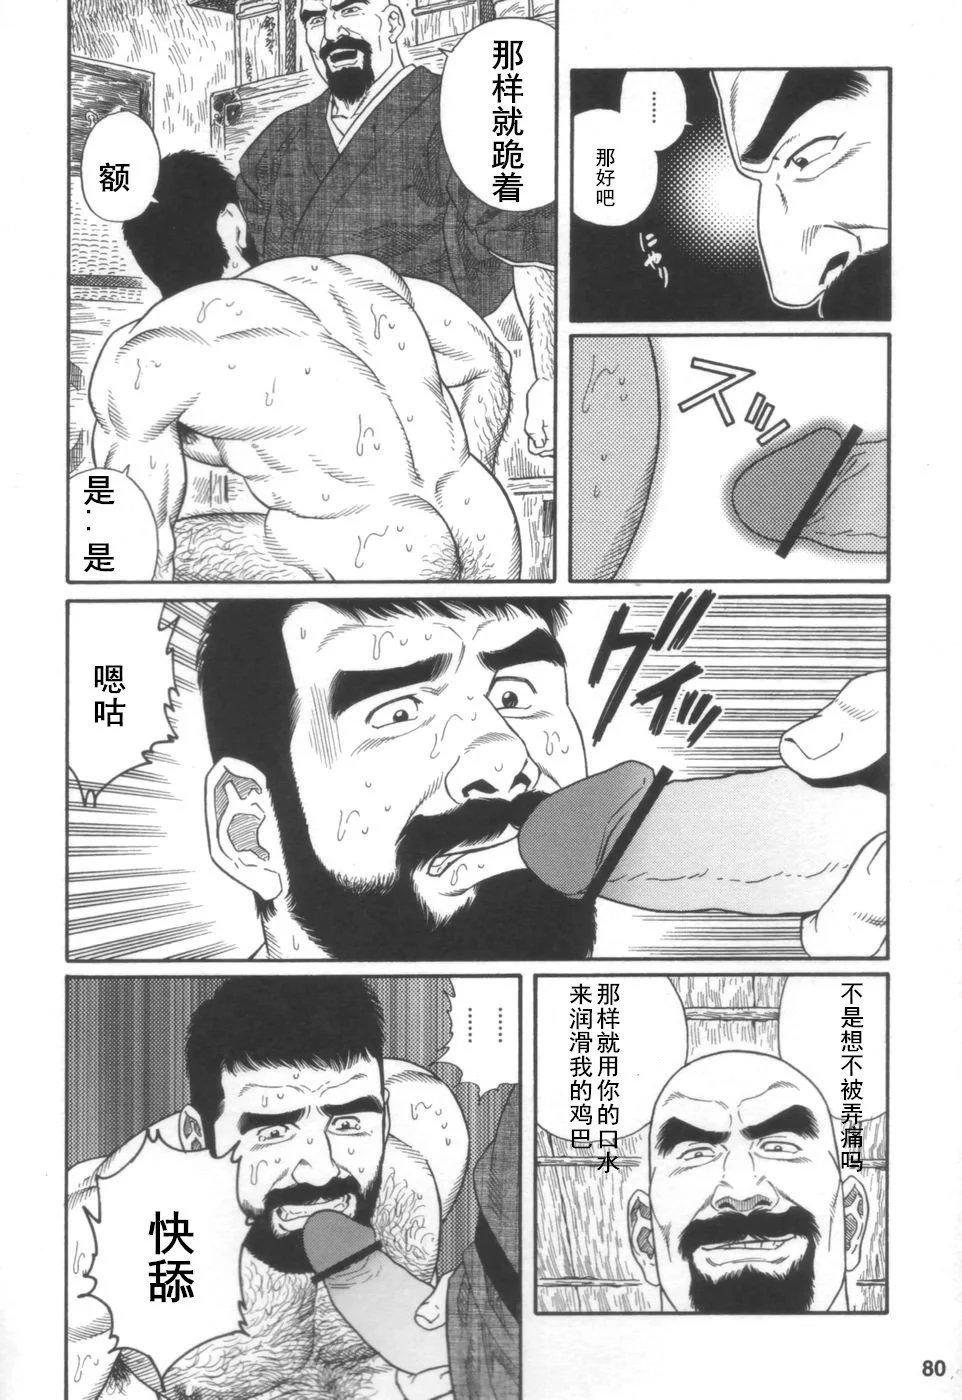 Perra Gedou no Ie Joukan | 邪道之家 Vol. 1 Ch.3 18yearsold - Page 6